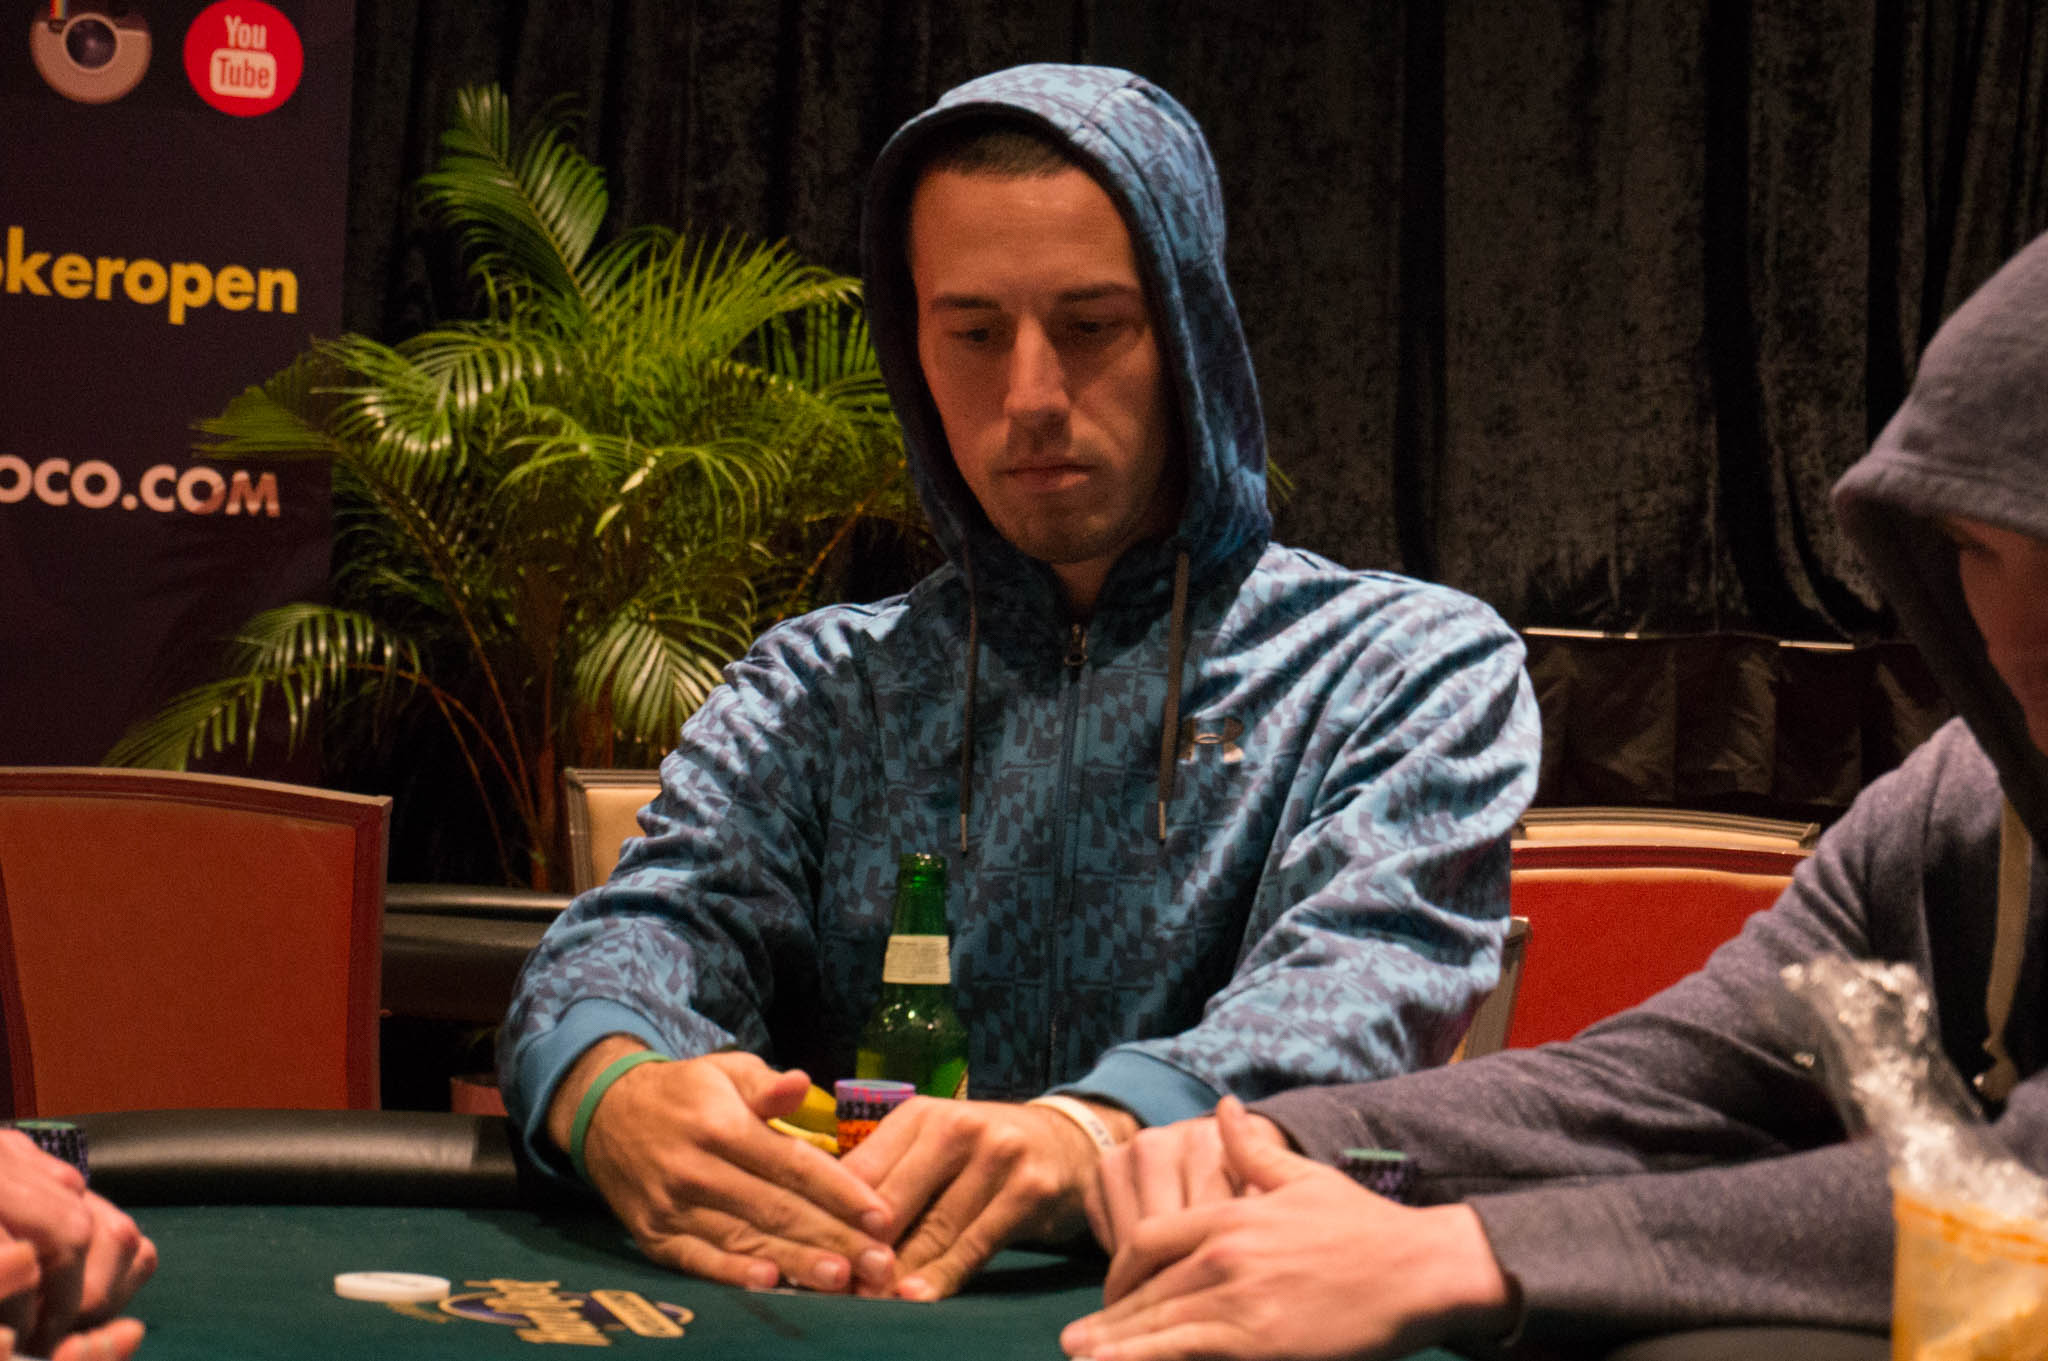 Shawn Nagy is the early PLO leader